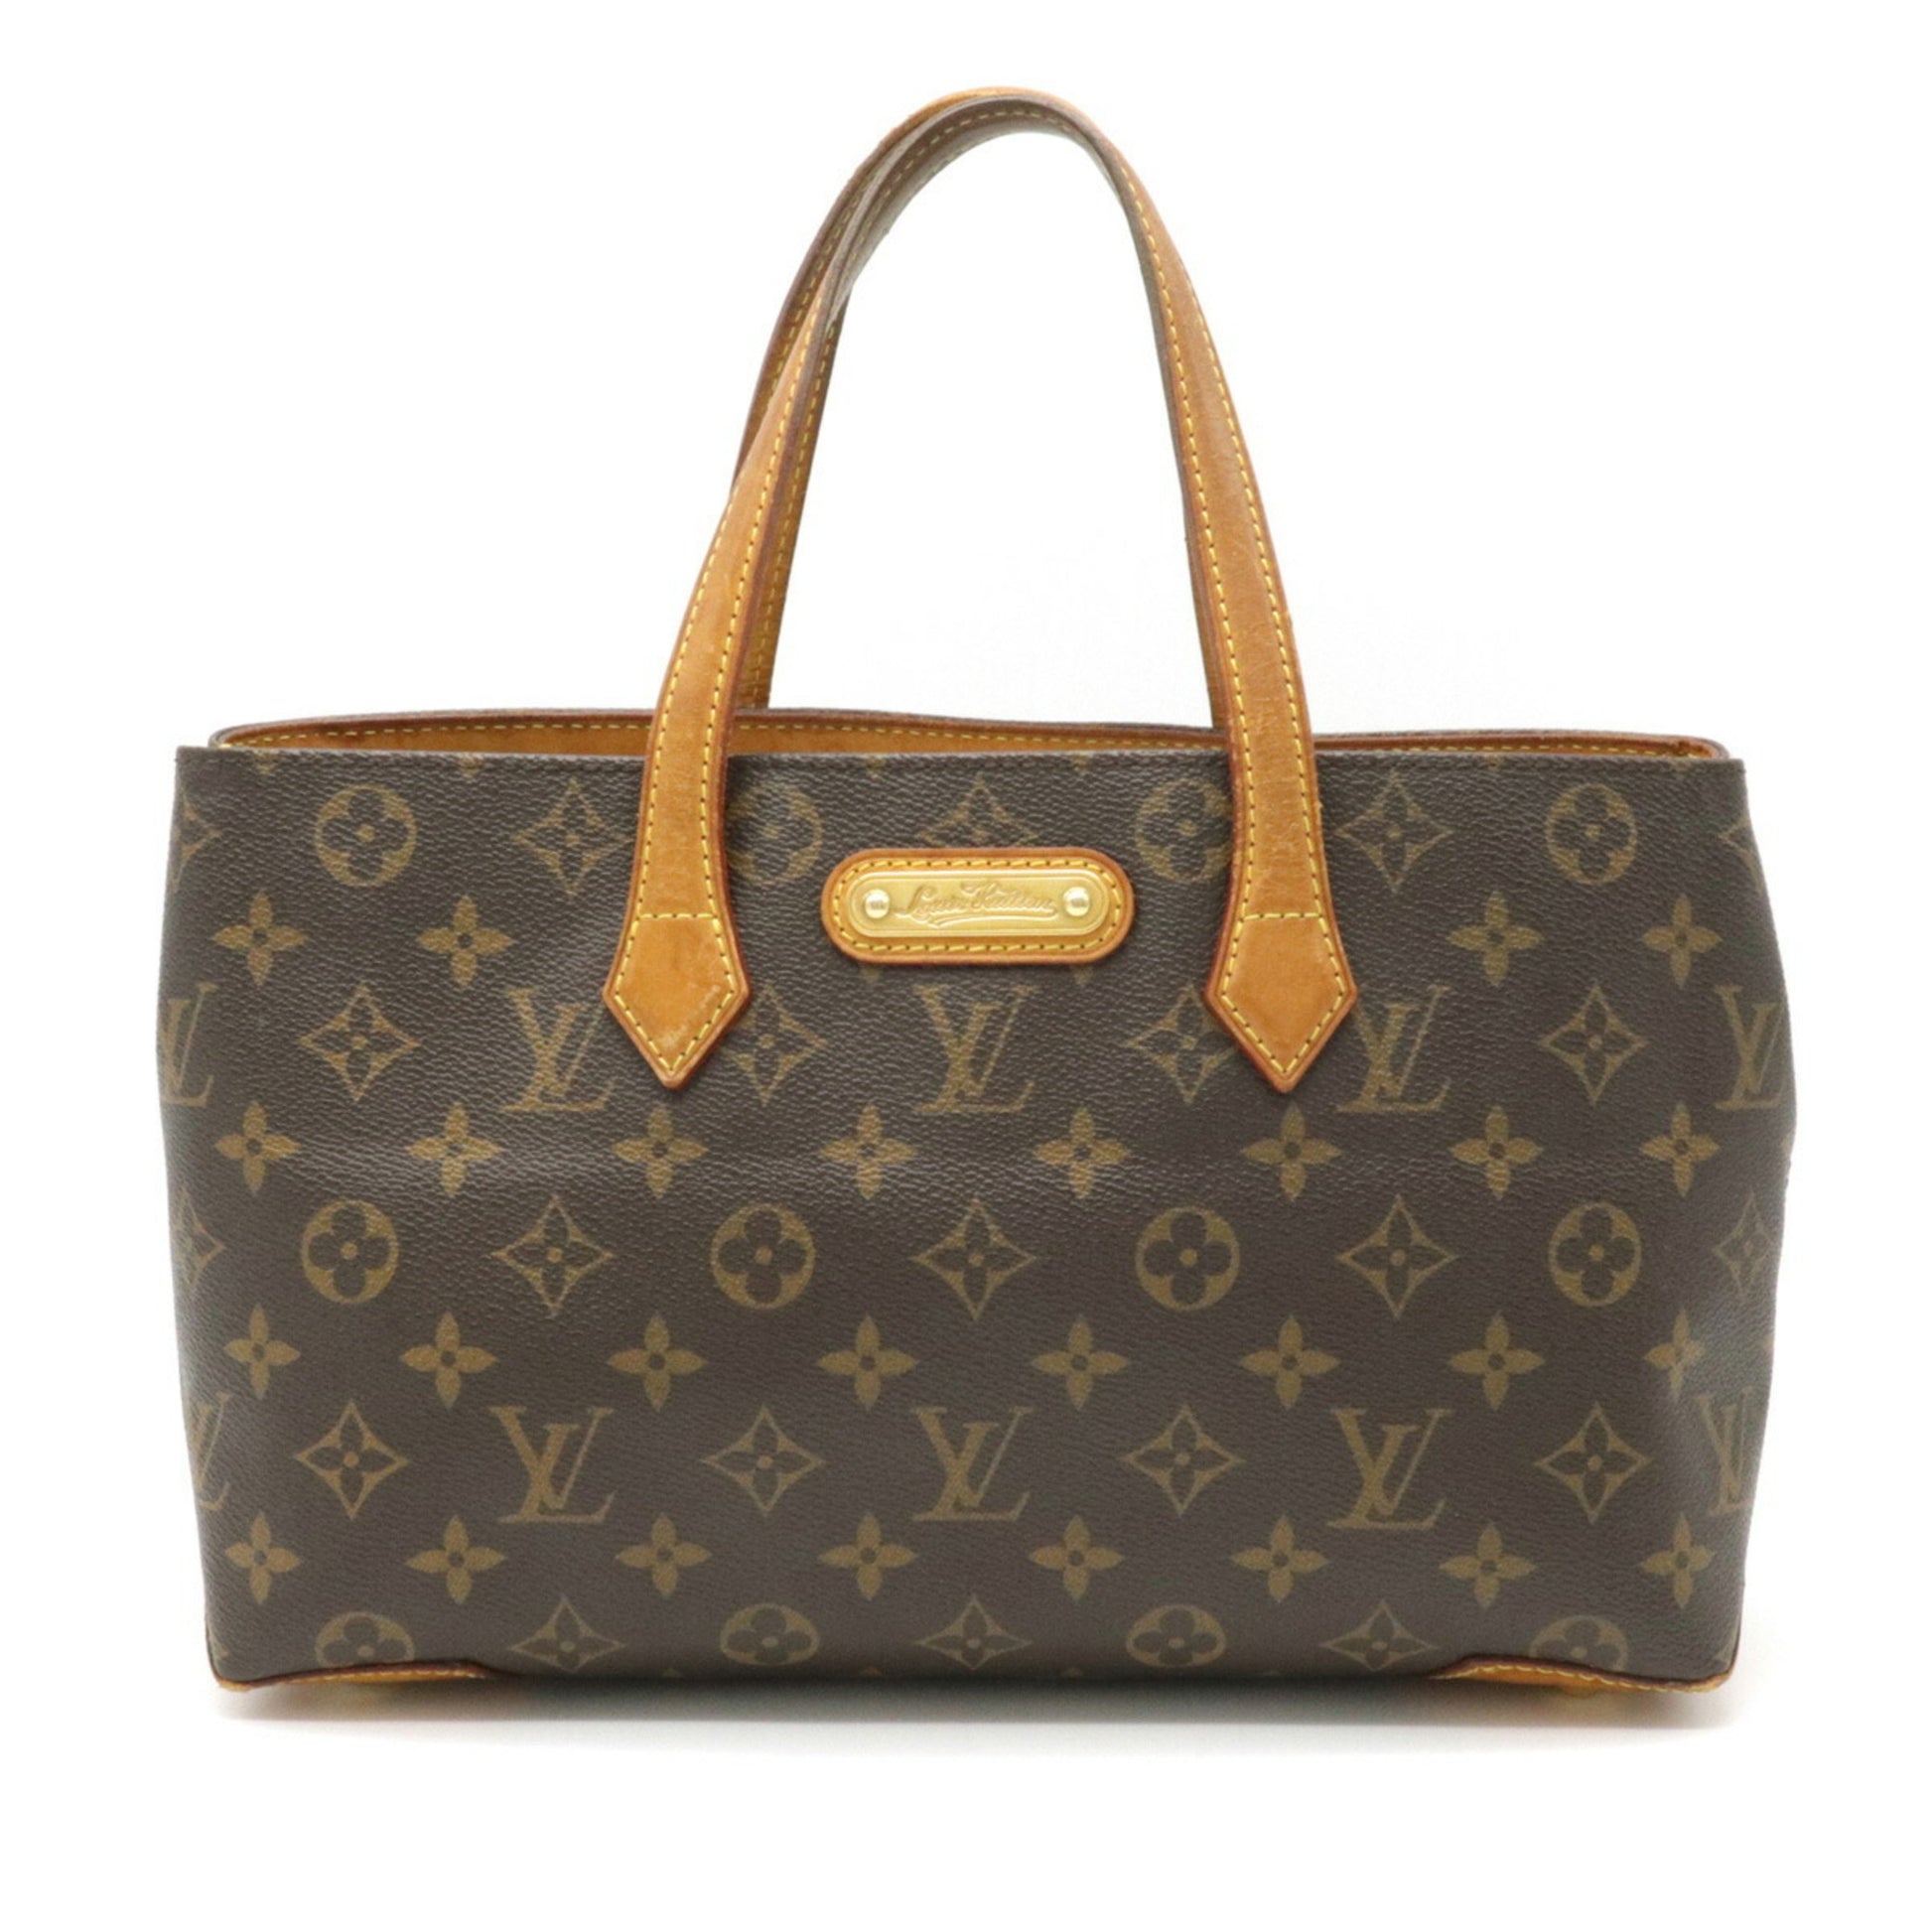 A Guide to Authenticating the Louis Vuitton Monogram Wilshire